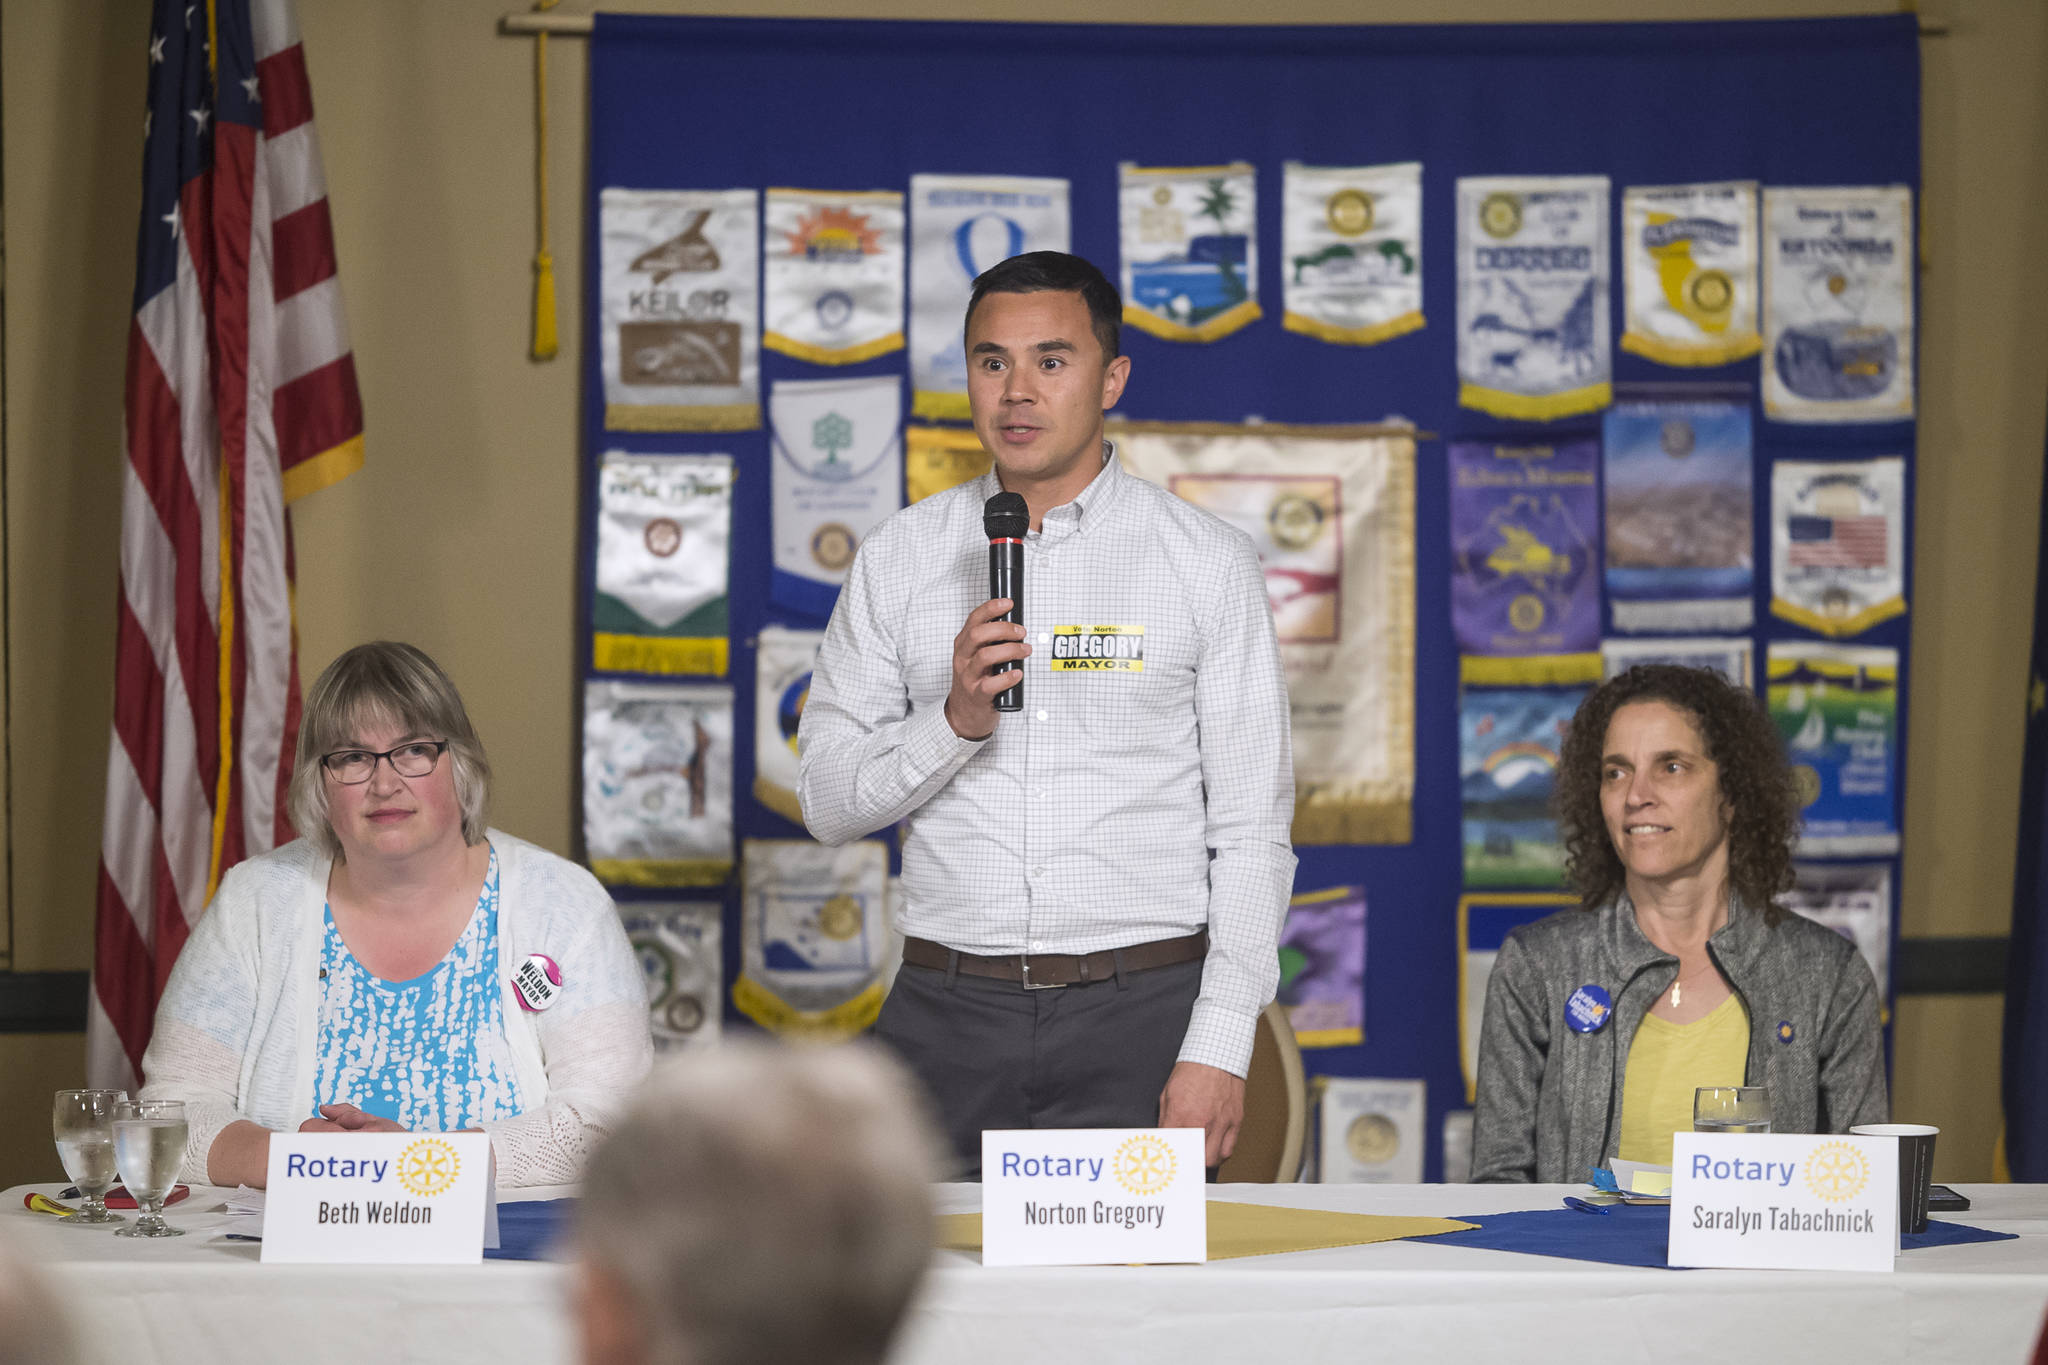 Juneau mayoral candidates Beth Weldon, left, Norton Gregory, center, and Saralyn Tabachnick introduce themselves to the Rotary Club of Juneau during their luncheon at the Baranof Hotel on Tuesday, Sept. 25, 2018. (Michael Penn | Juneau Empire)